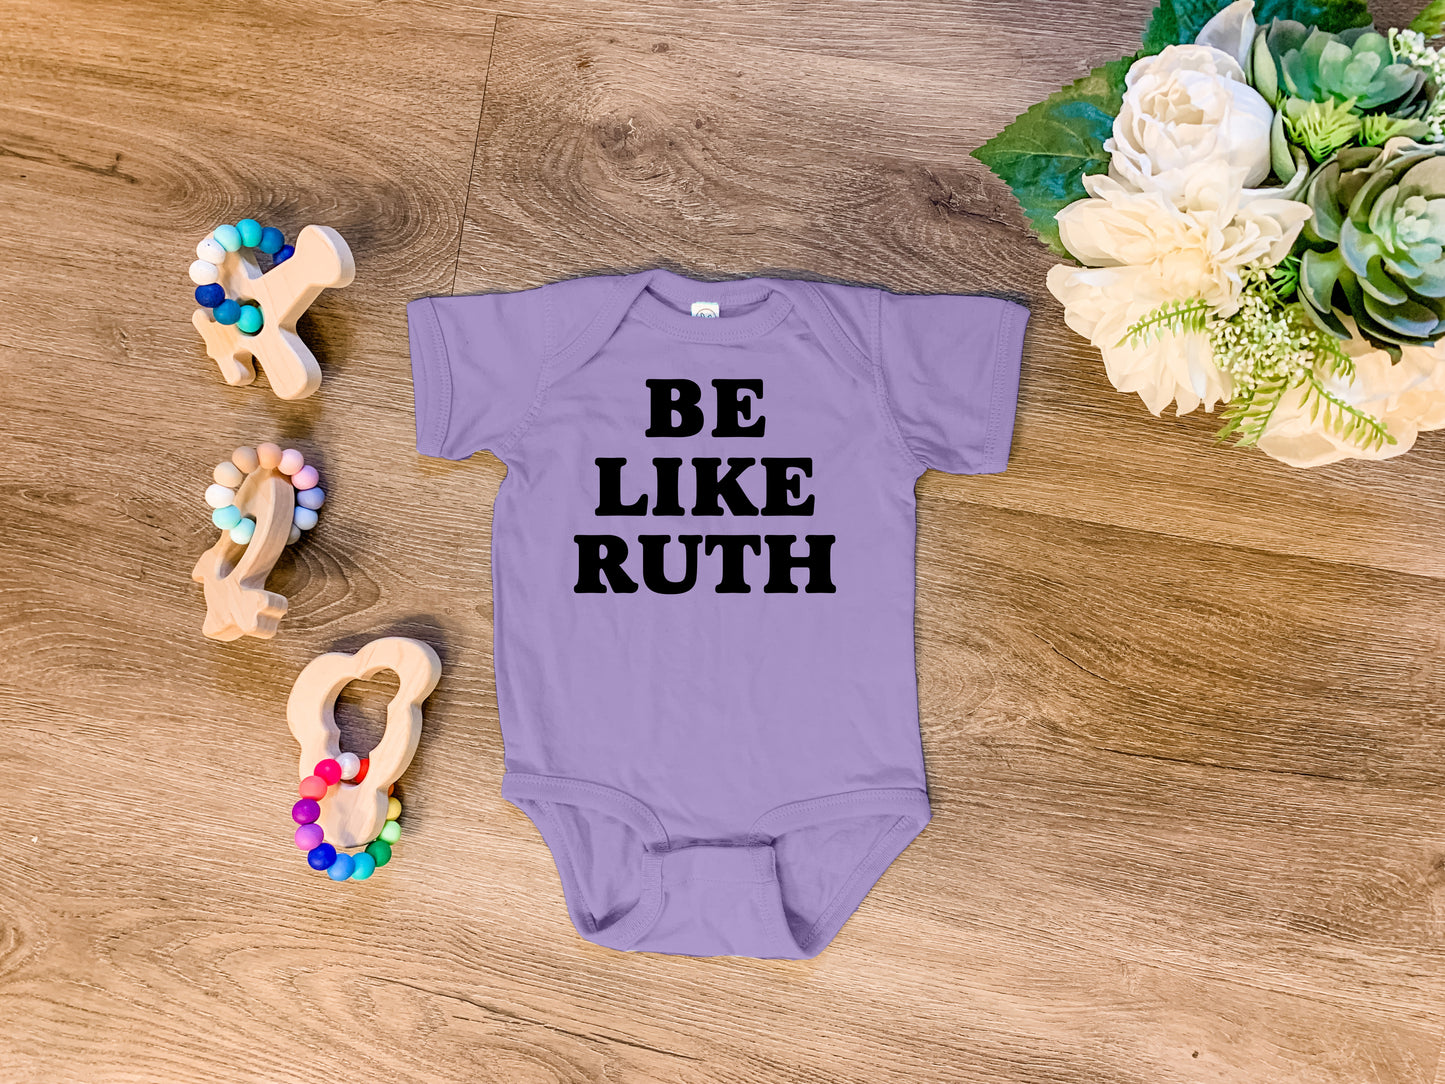 Be Like Ruth (Bader Ginsburg/ RBG) - Onesie - Heather Gray, Chill, or Lavender